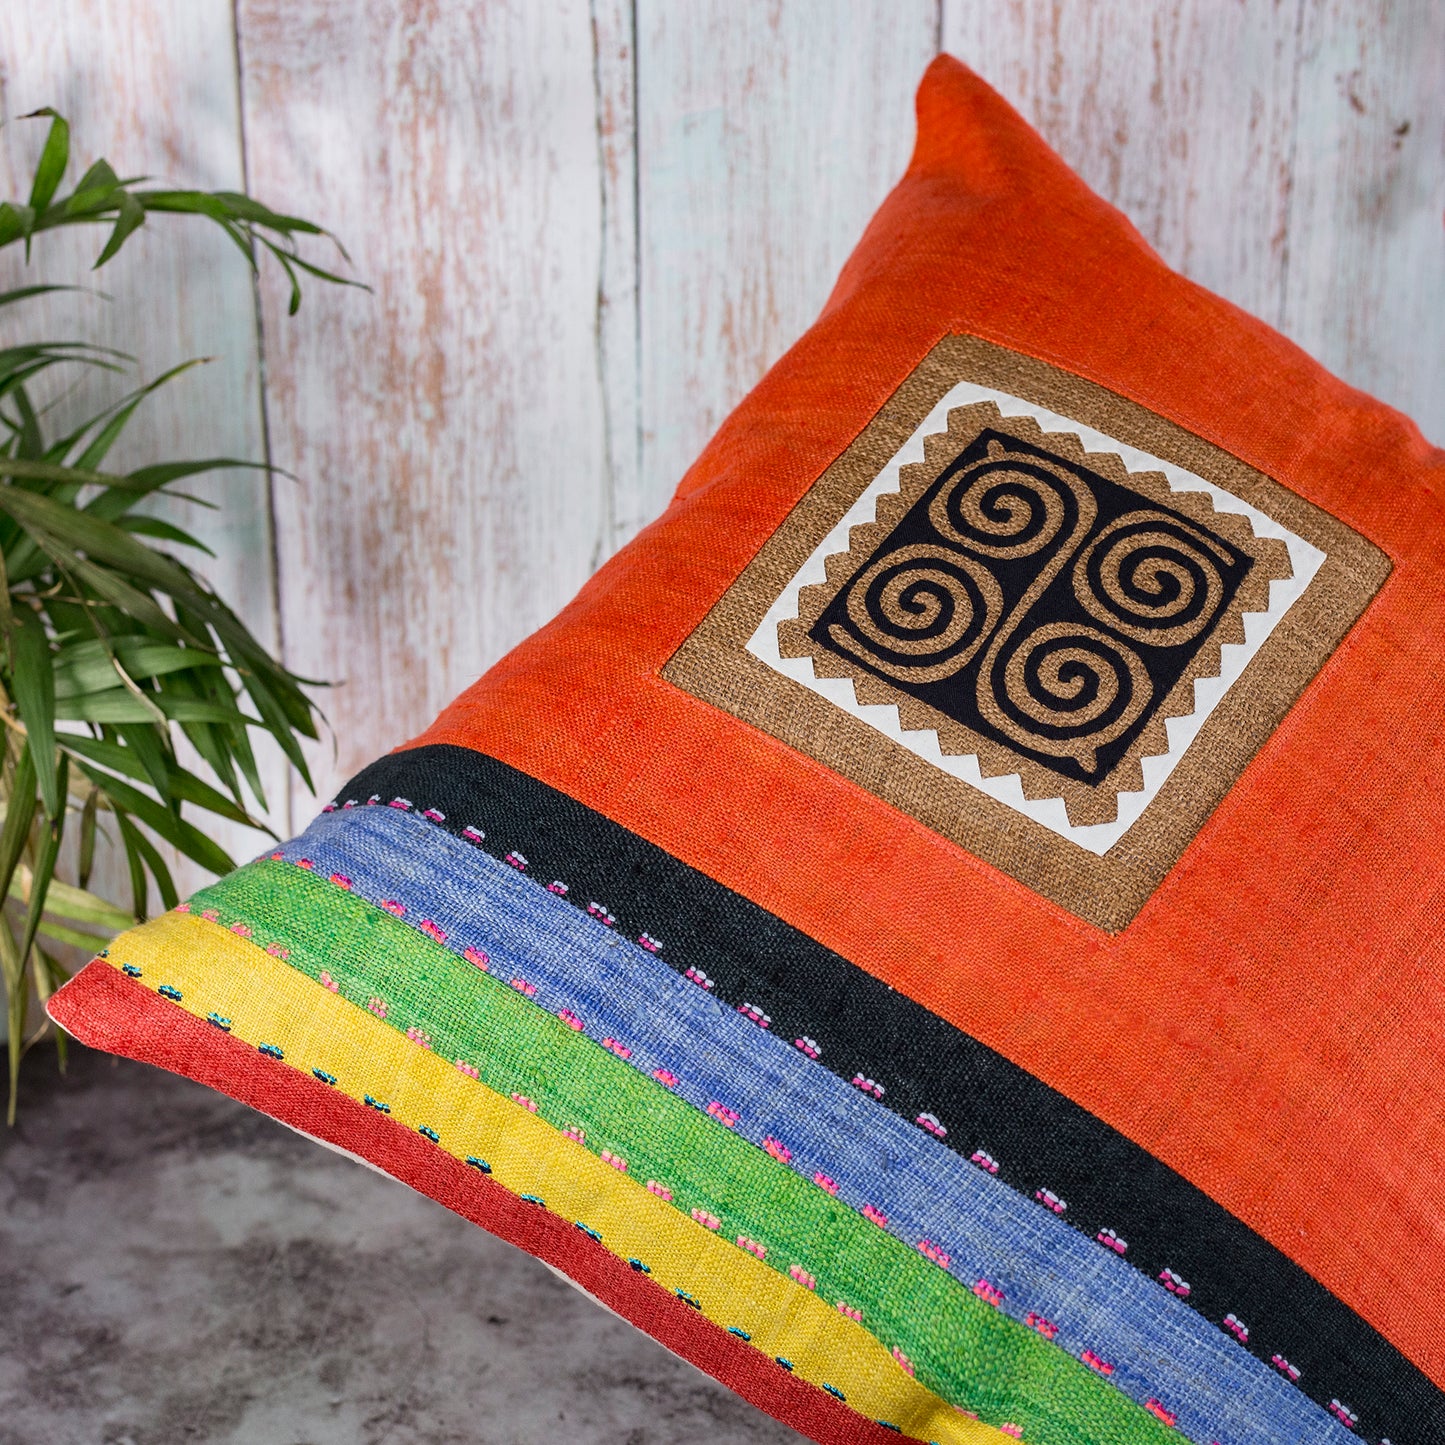 Orange Hemp Cushion Cover with stripes in different colors, hand-stitched pattern in black and brown